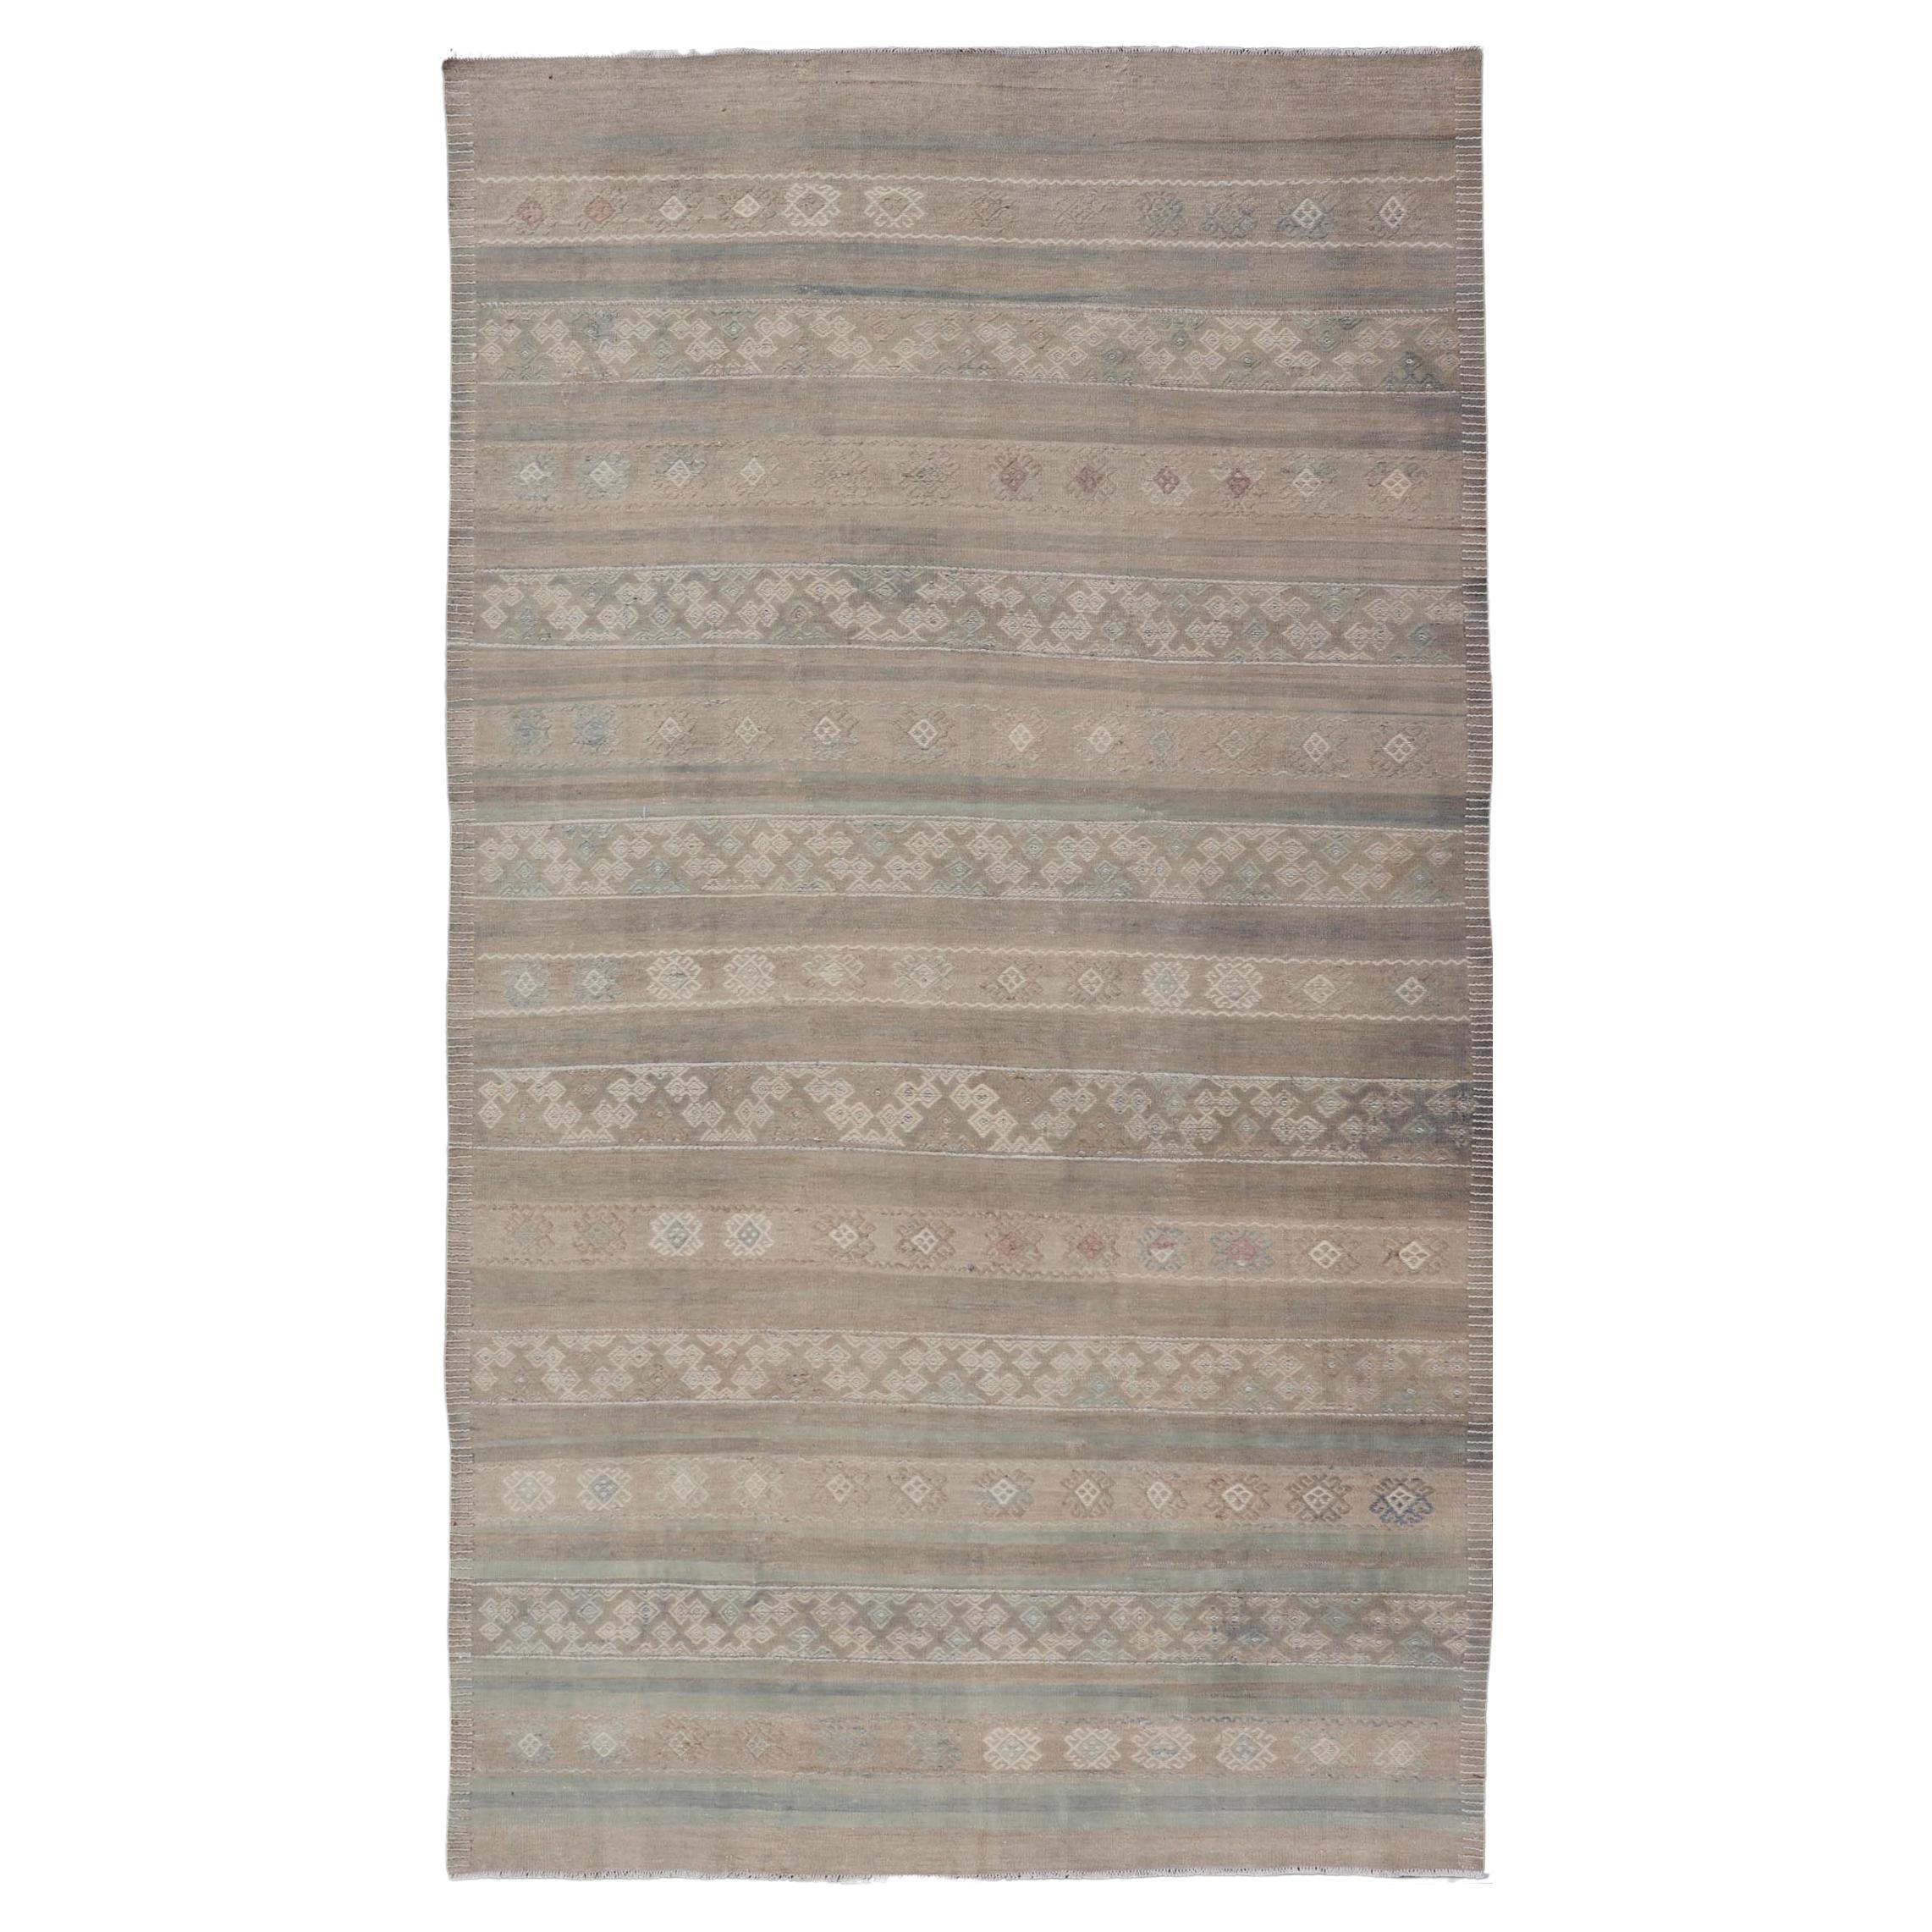 Vintage Turkish Kilim with Stripes in Taupe, Green, Tan, Cream and Brown For Sale